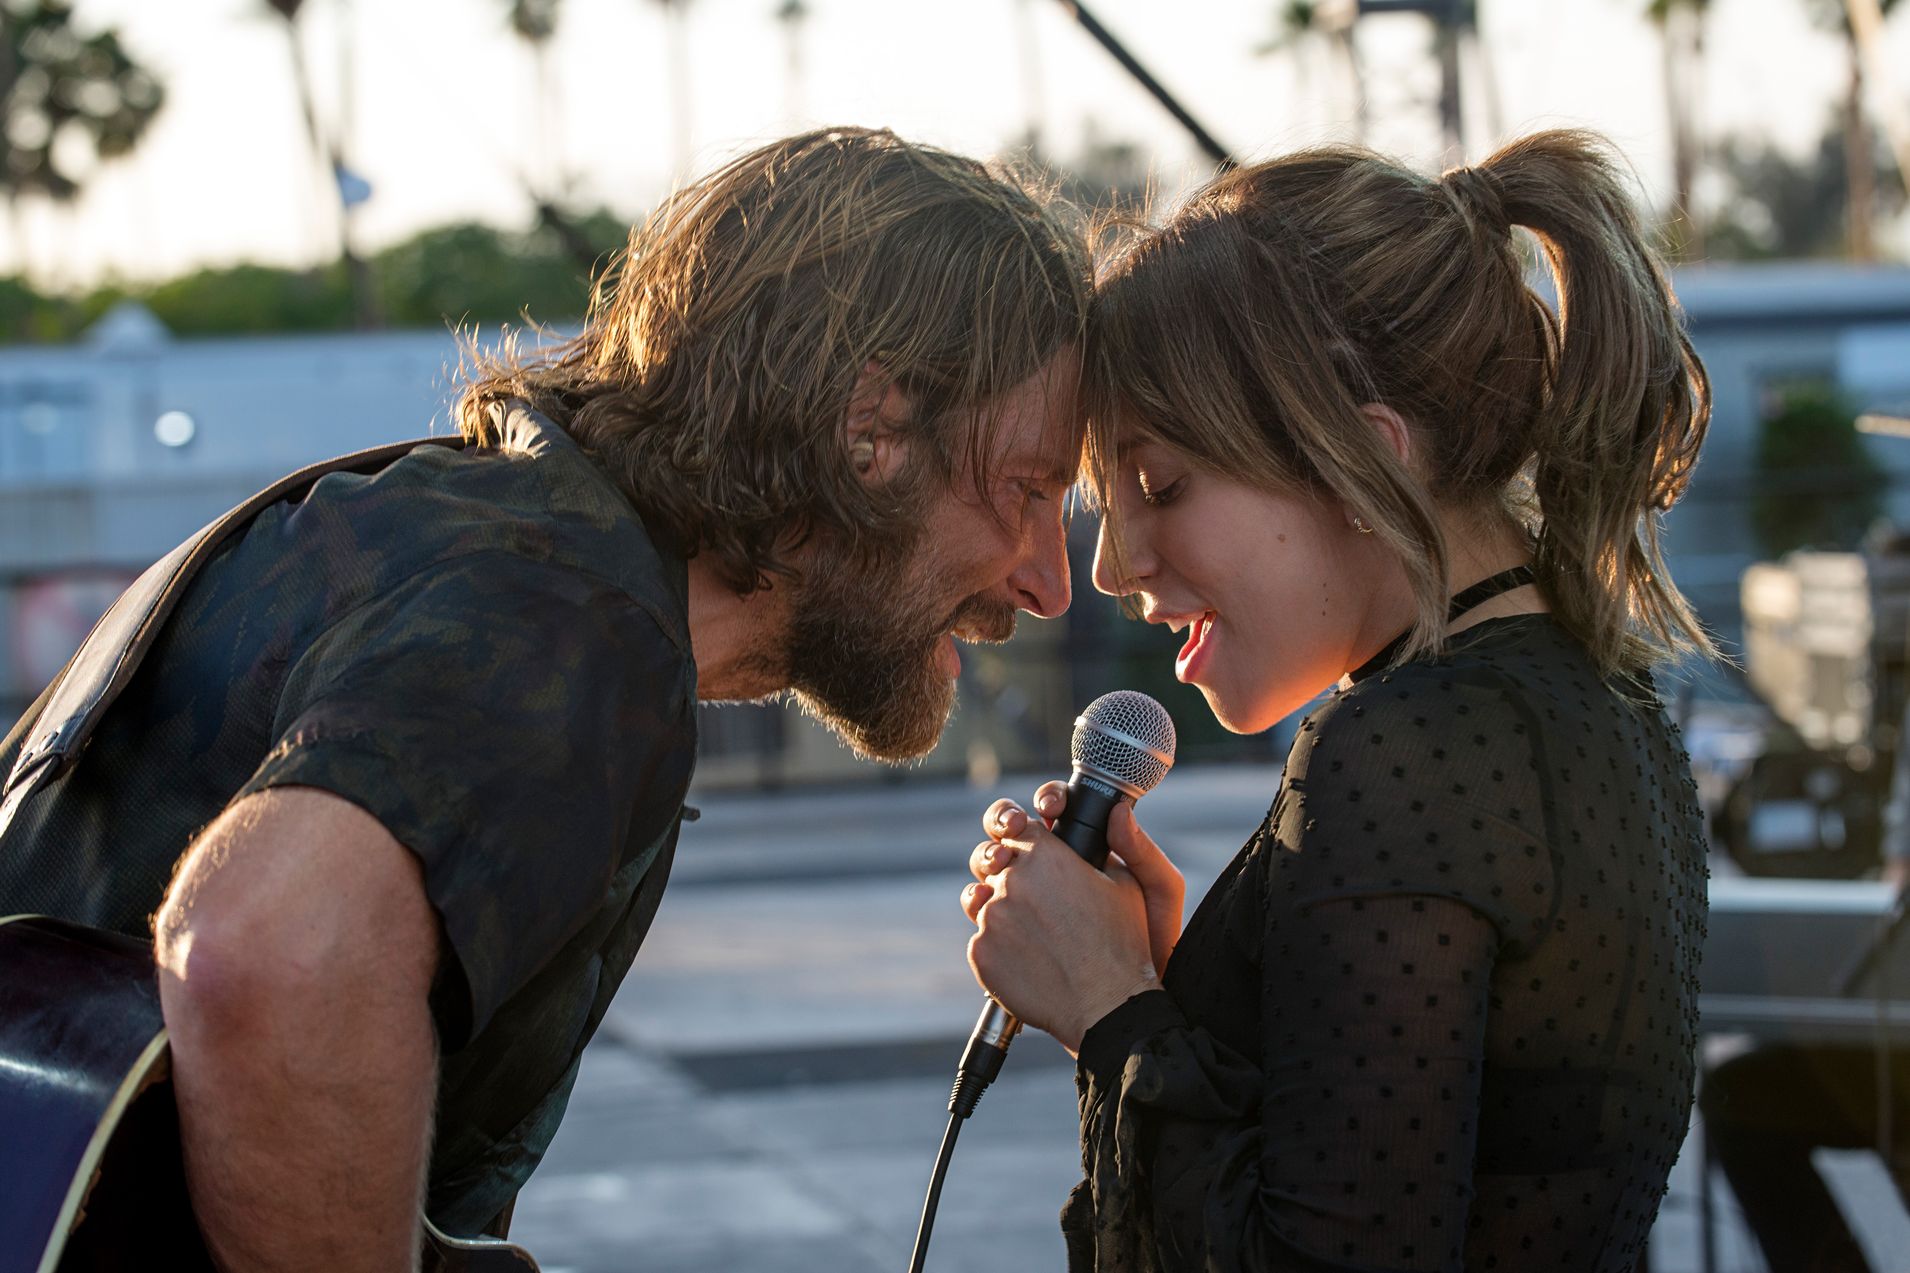 ‘A Star Is Born’ Review: Cooper, Lady Gaga Hit All the Right Notes